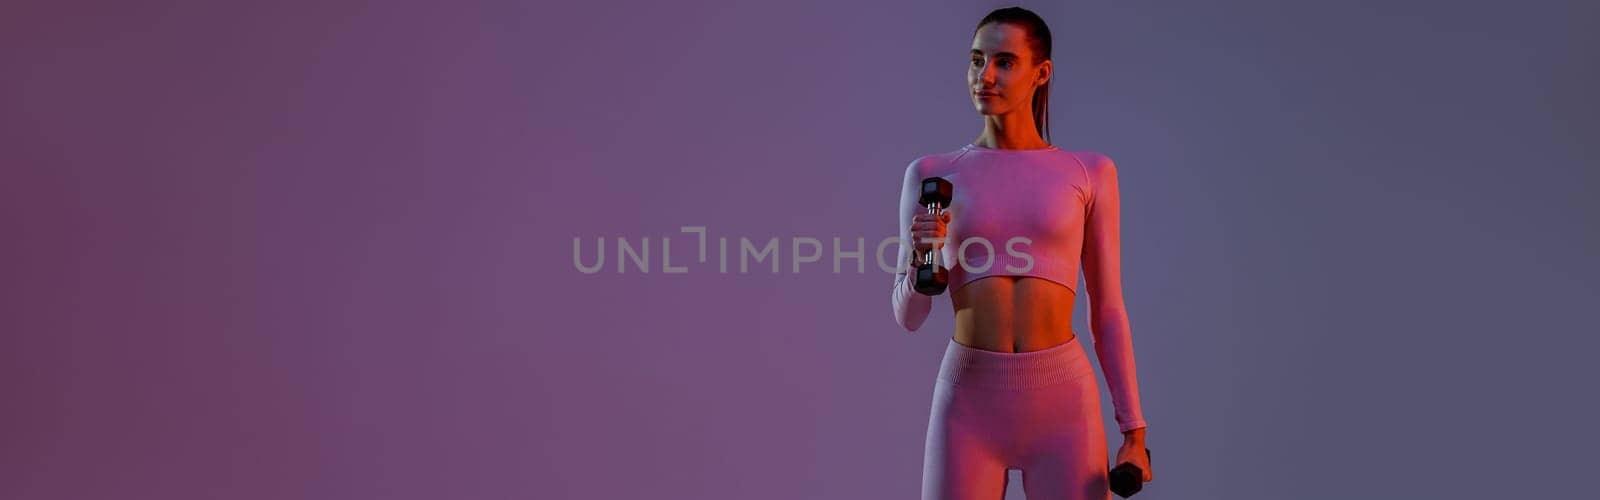 Attractive fitness woman doing exercises with dumbbells on studio background with colored filter by Yaroslav_astakhov